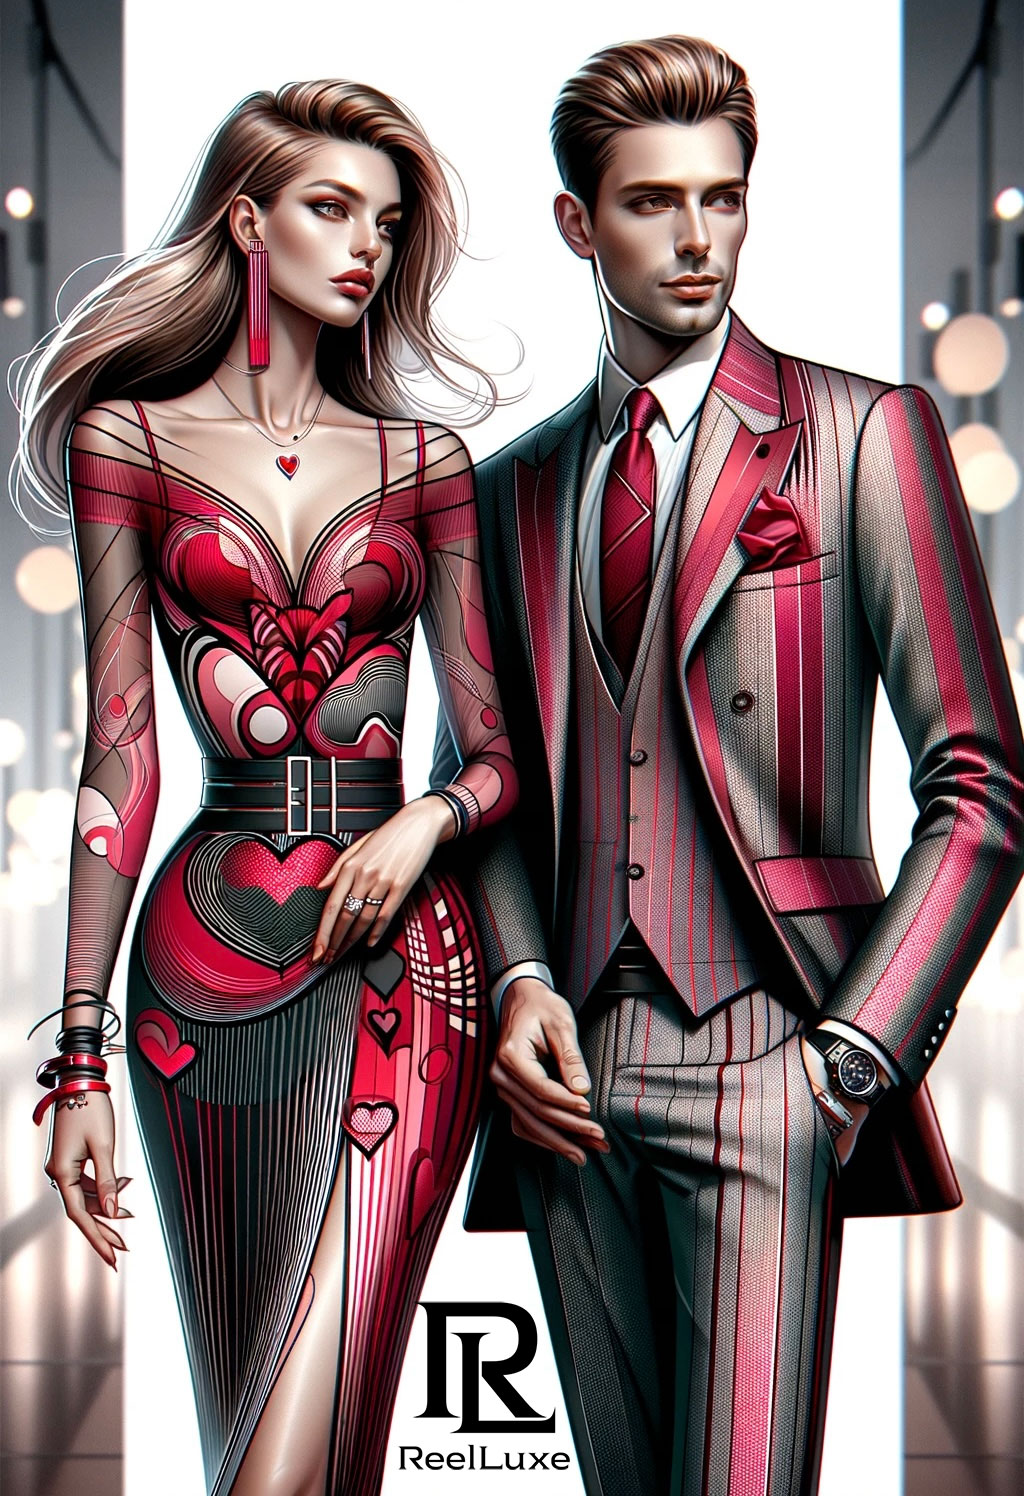 Romance in the Air - Valentine's Day - Beauty and Fashion - 4